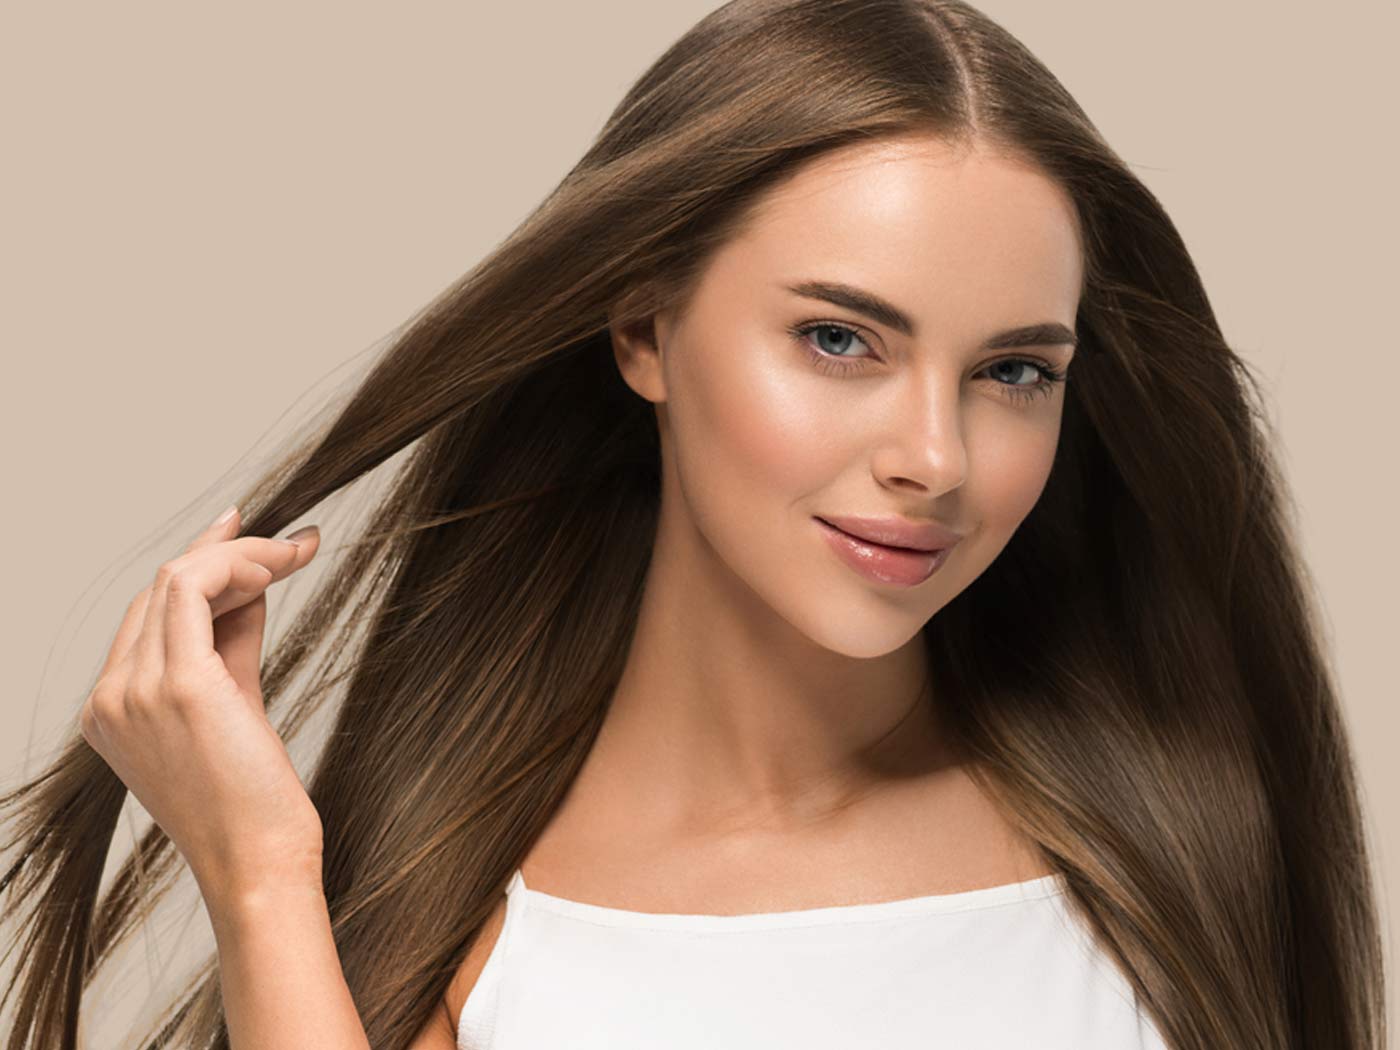 Top Tips and Home Remedies to Get Shiny Hair at Home